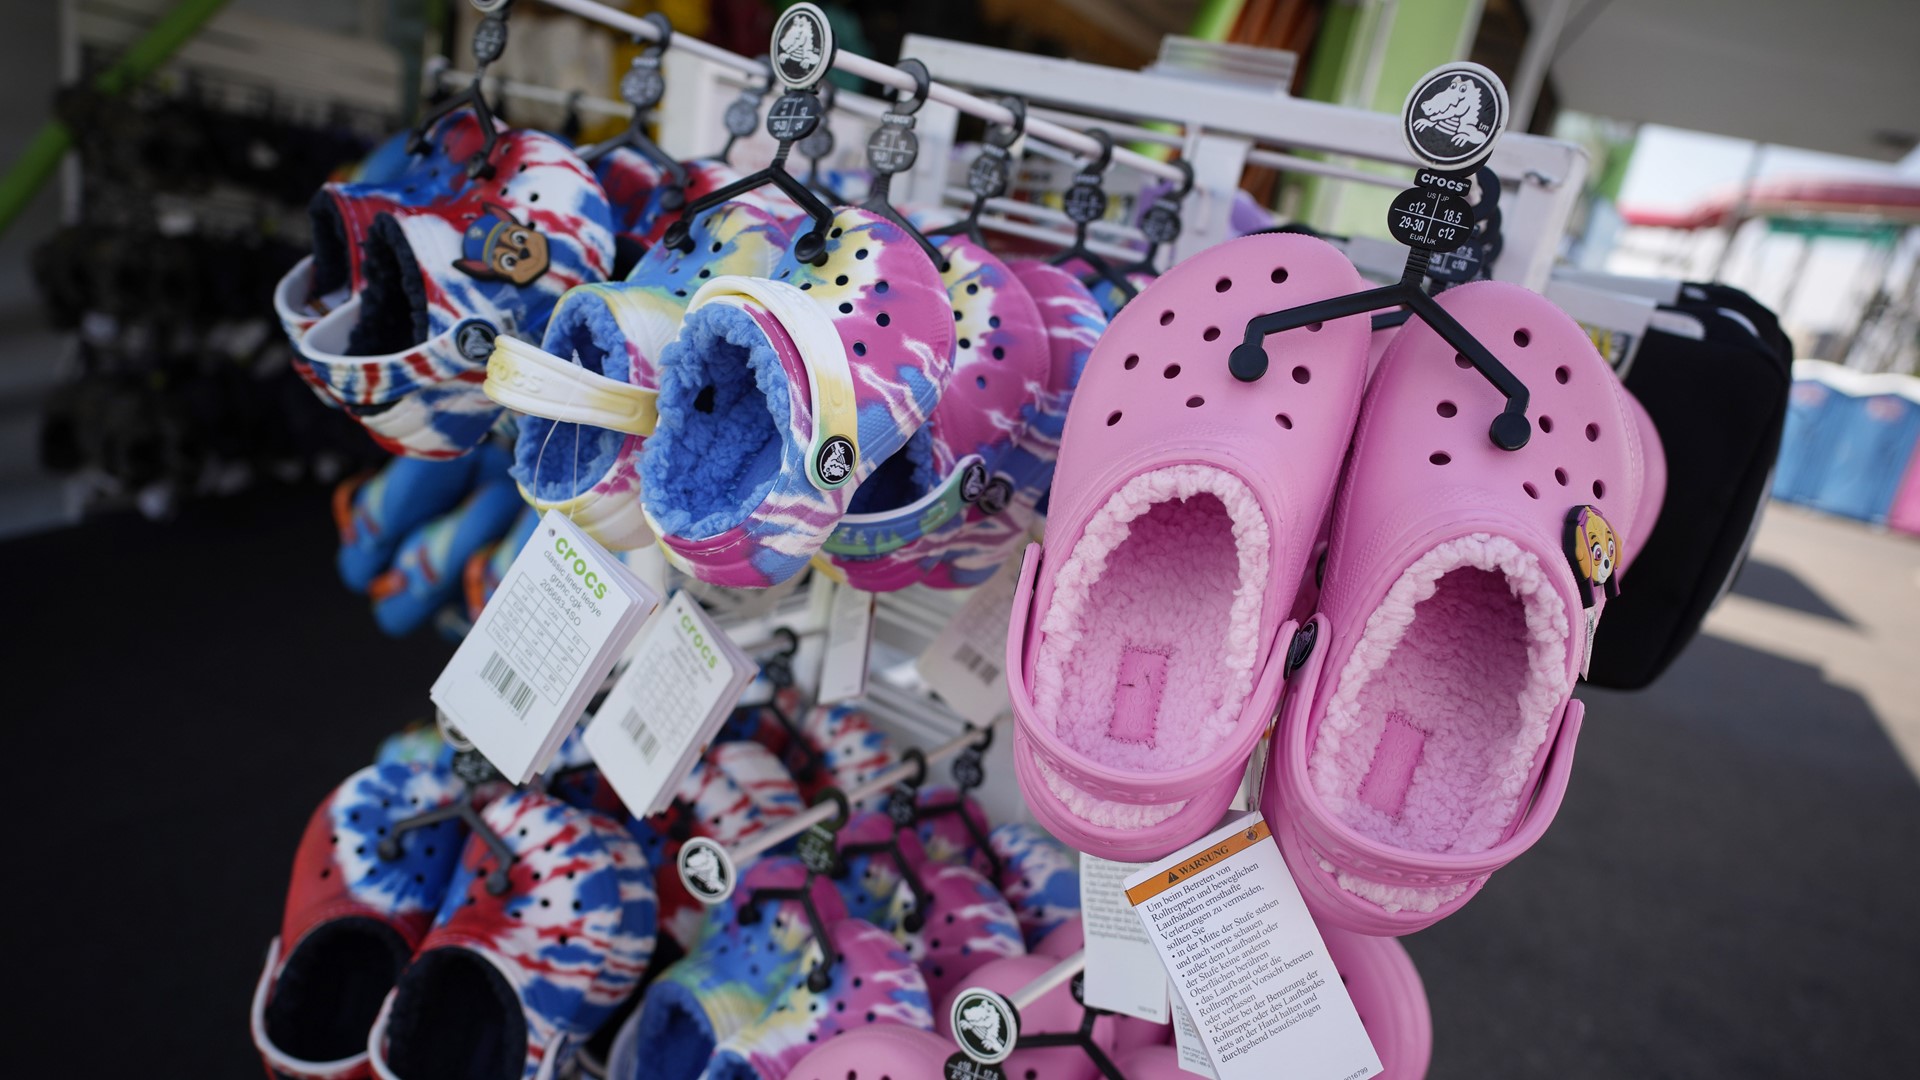 For National Nurses Week, Crocs is bringing back its Free Pair for Healthcare program and partnering with FIGS to give away scrubs, too.